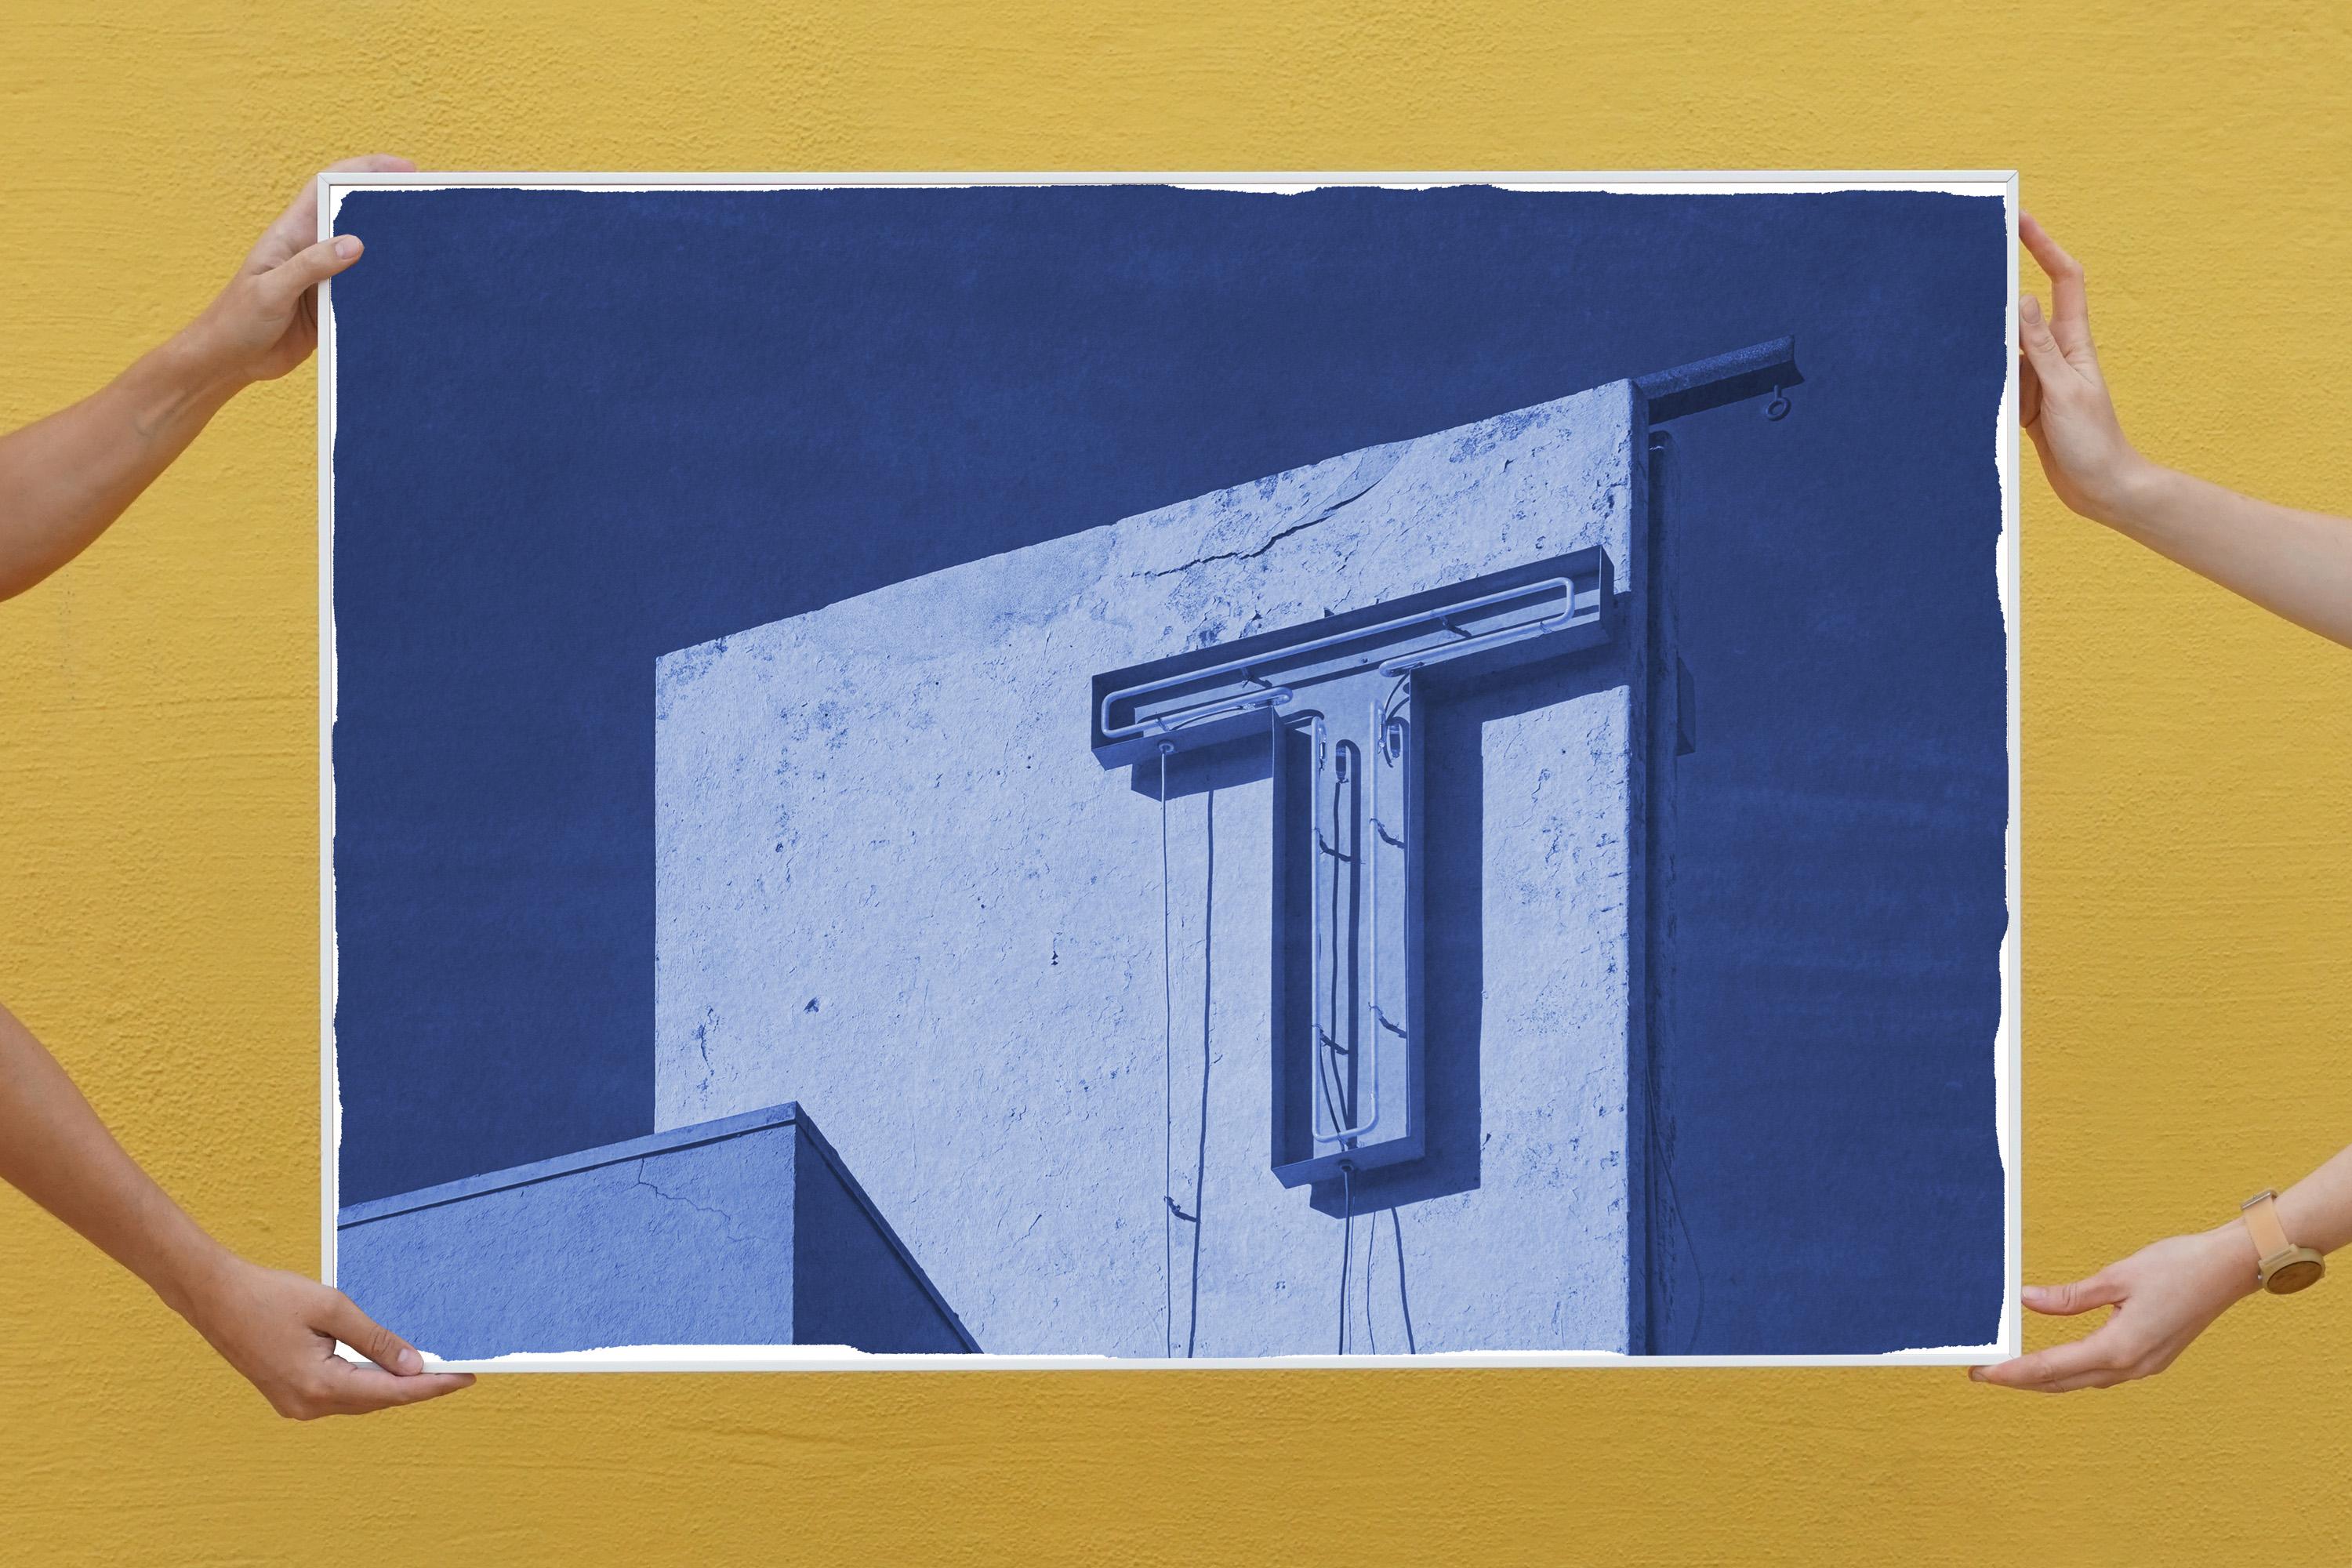 This is an exclusive handprinted limited edition cyanotype. 
This beautiful cyanotype portrays a Modern Art Deco building facade in Miami Beach. 

Details:
+ Title: The Tropical
+ Year: 2022
+ Edition Size: 100
+ Stamped and Certificate of